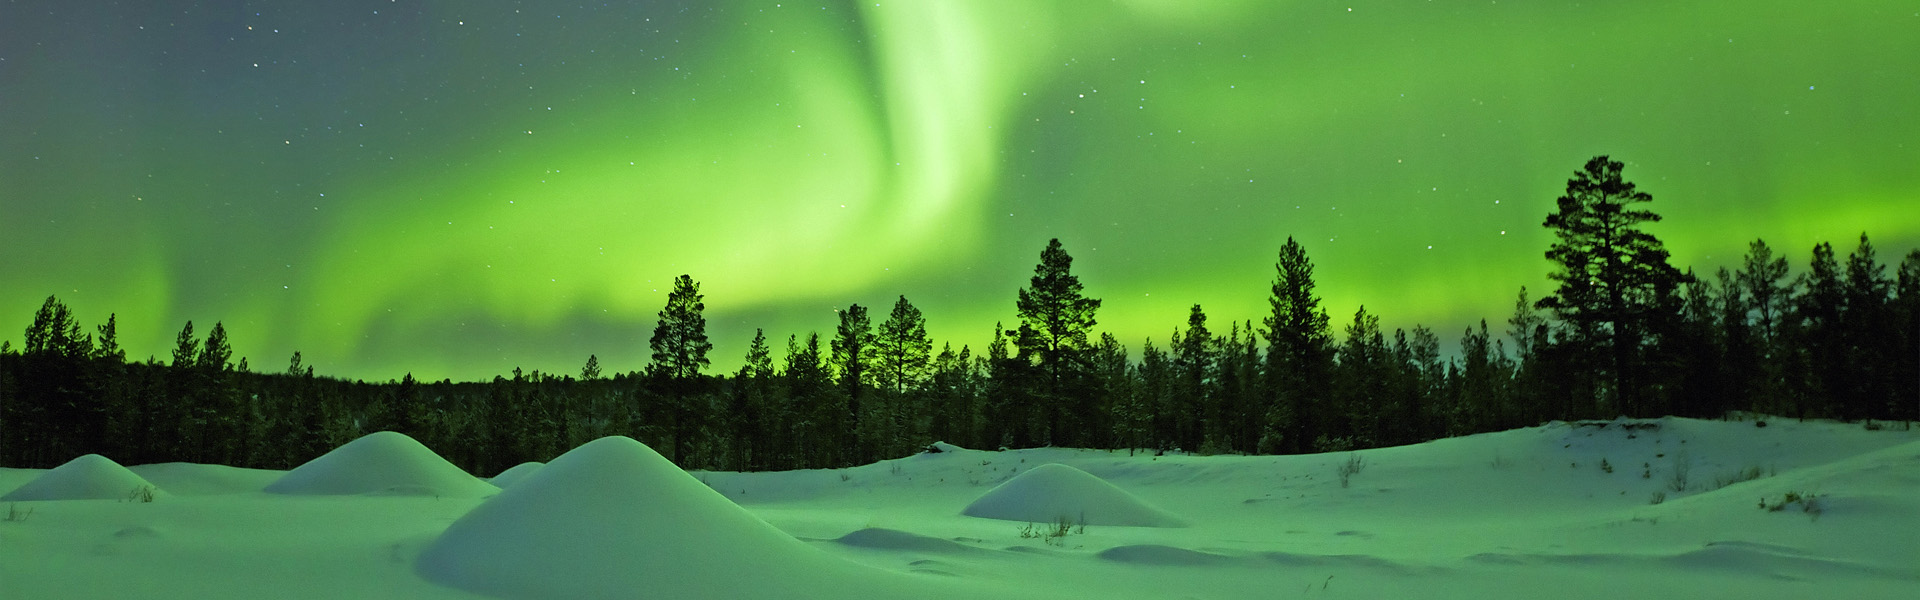 Spectacular aurora borealis (northern lights) over a snowy winter landscape in Finnish Lapland.